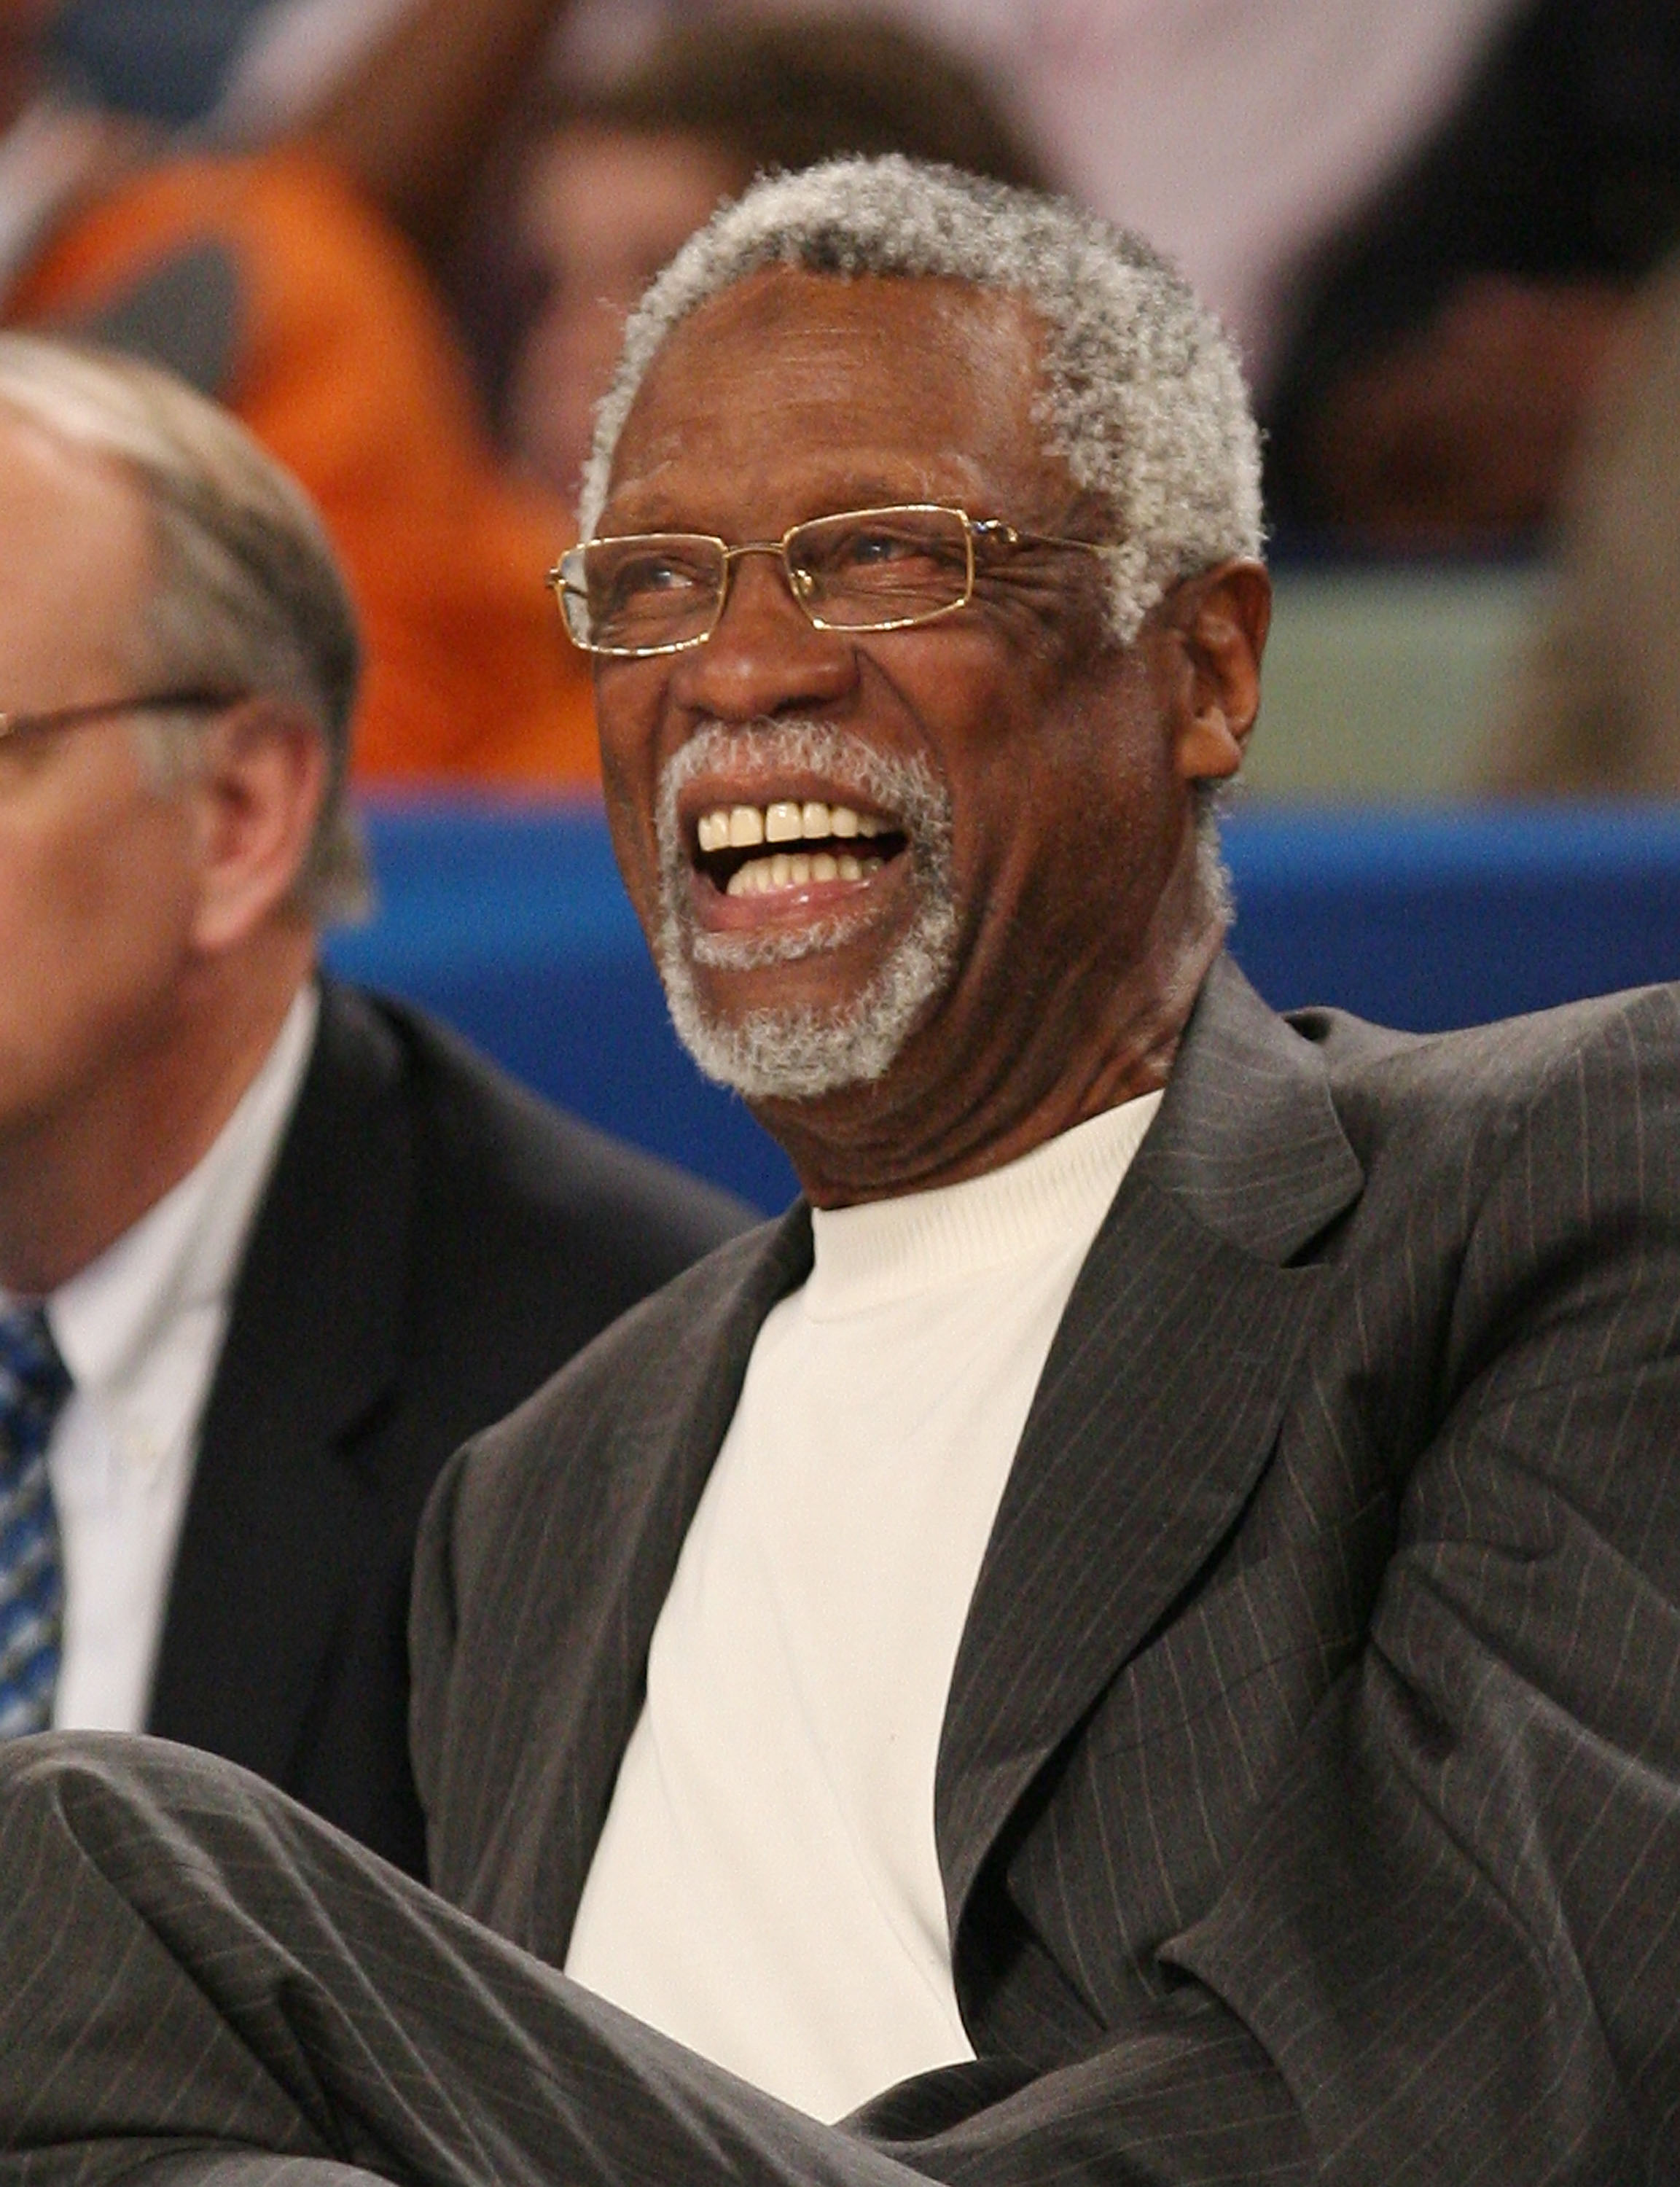 NEW ORLEANS - FEBRUARY 17:  Bill Russell attends the 57th NBA All-Star Game, part of 2008 NBA All-Star Weekend at the New Orleans Arena on February 17, 2008 in New Orleans, Louisiana.  NOTE TO USER: User expressly acknowledges and agrees that, by download